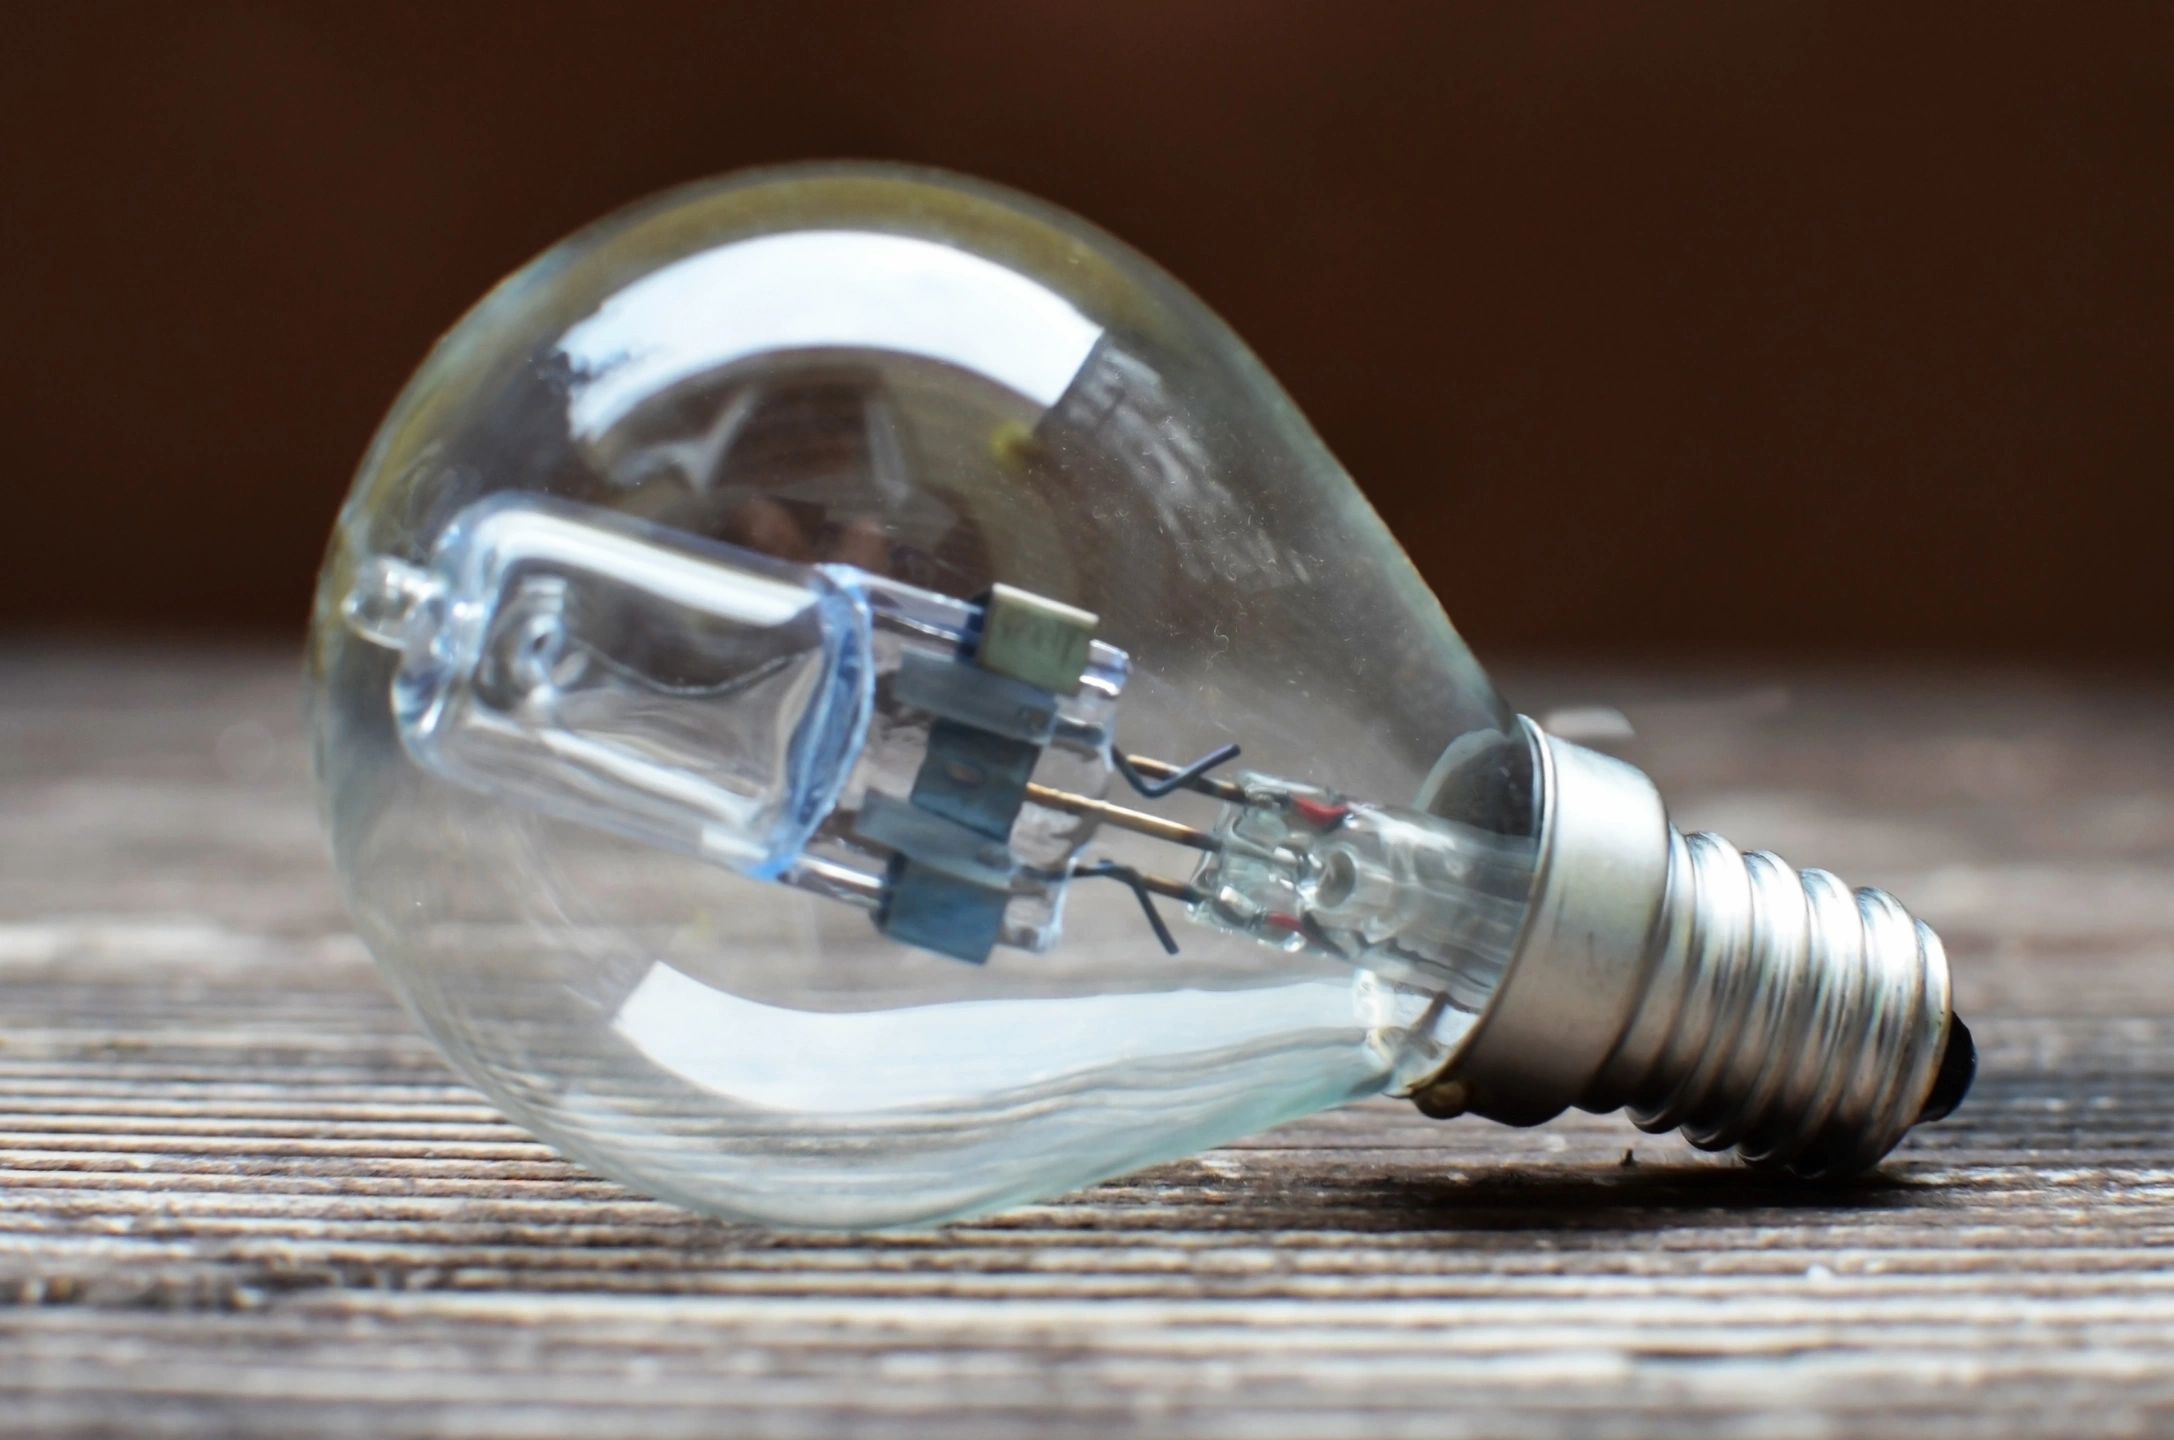 A light bulb lying on its side. The bulb is clear, revealing its inner components. This type of light bulb looks similar to a halogen bulb, which is known for being energy-efficient and providing bright light.